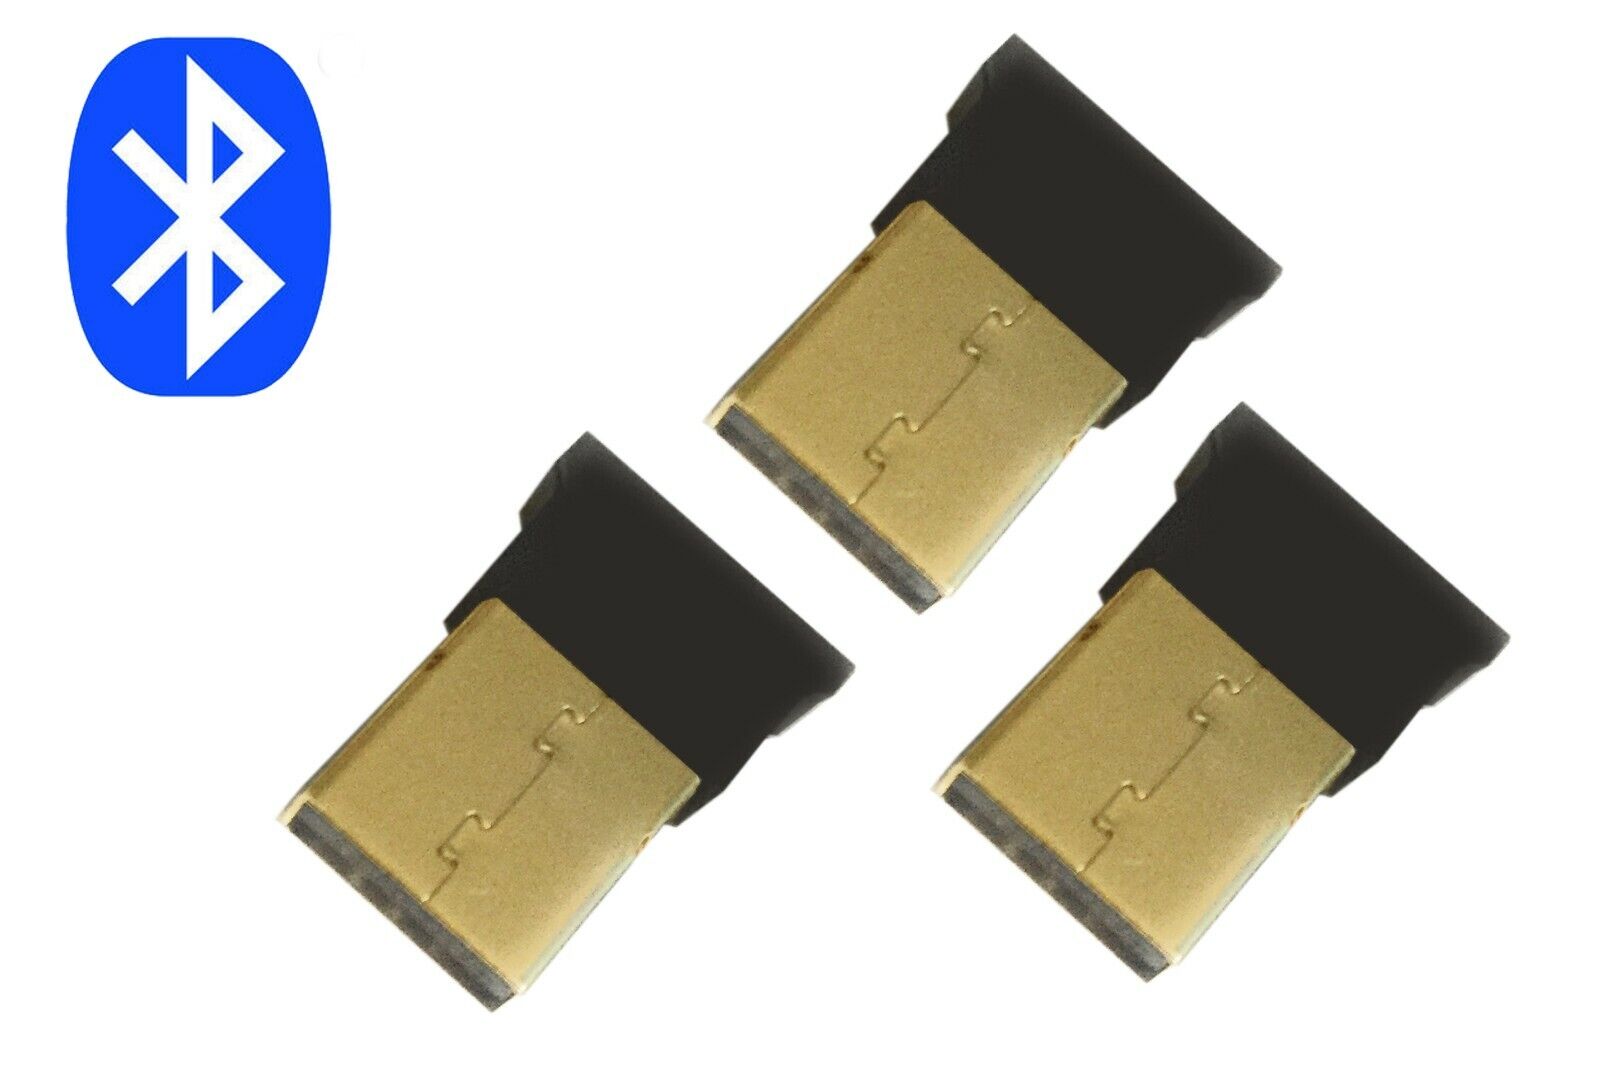 (3PK) Support Yealink Bluetooth USB Dongle SIP-T27G,T29G,T46G,T48G,T46S,T48S,T52